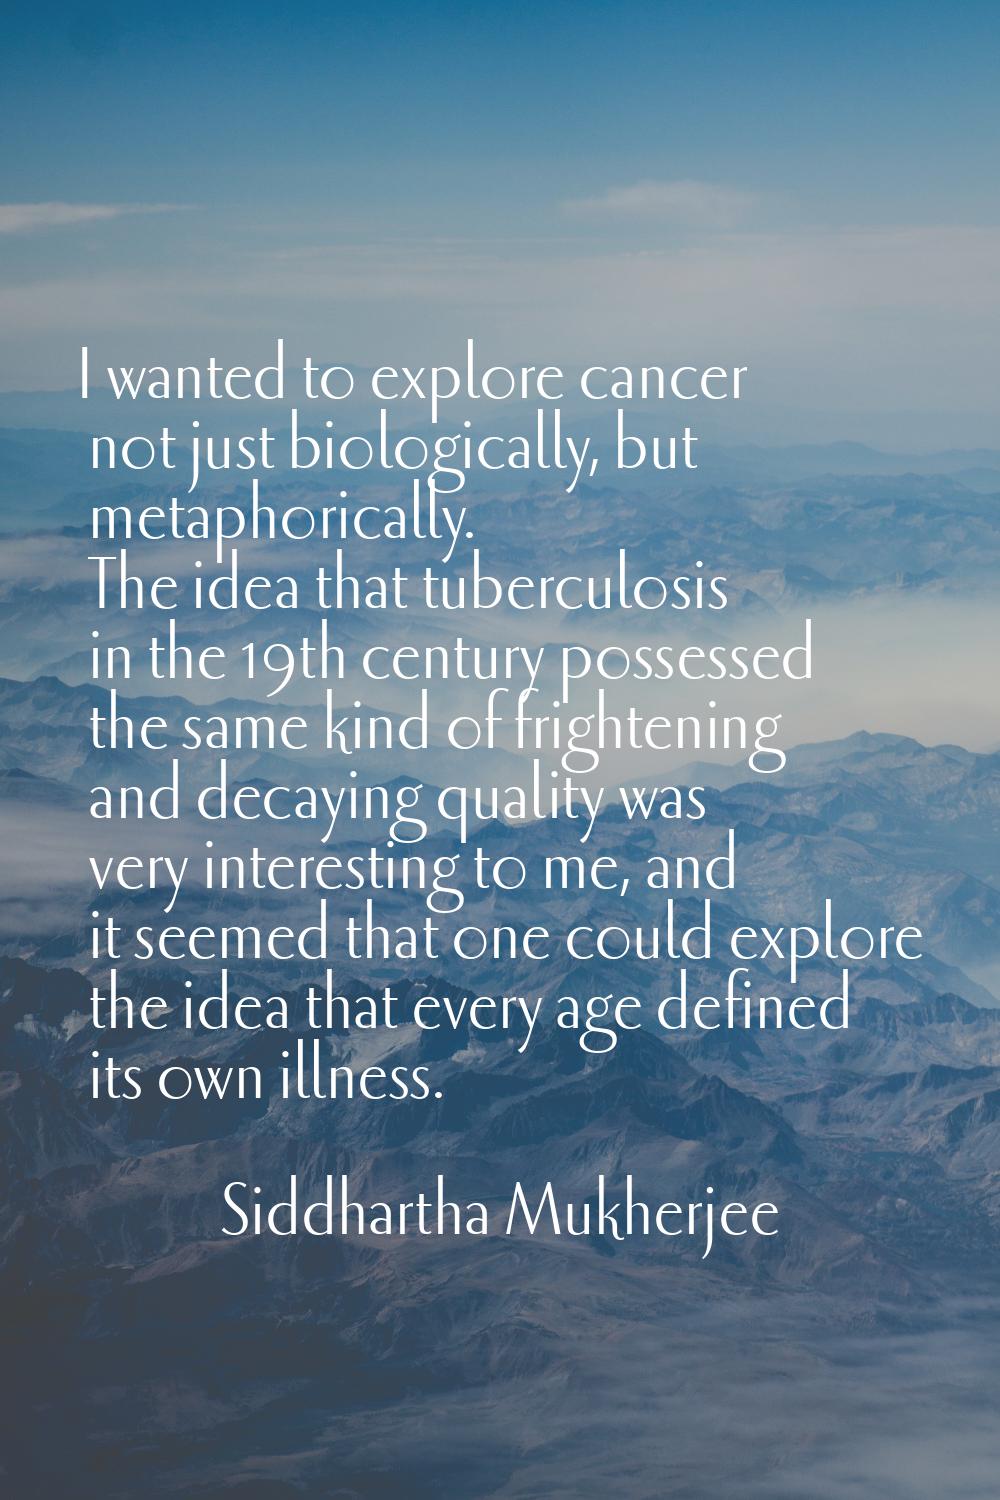 I wanted to explore cancer not just biologically, but metaphorically. The idea that tuberculosis in